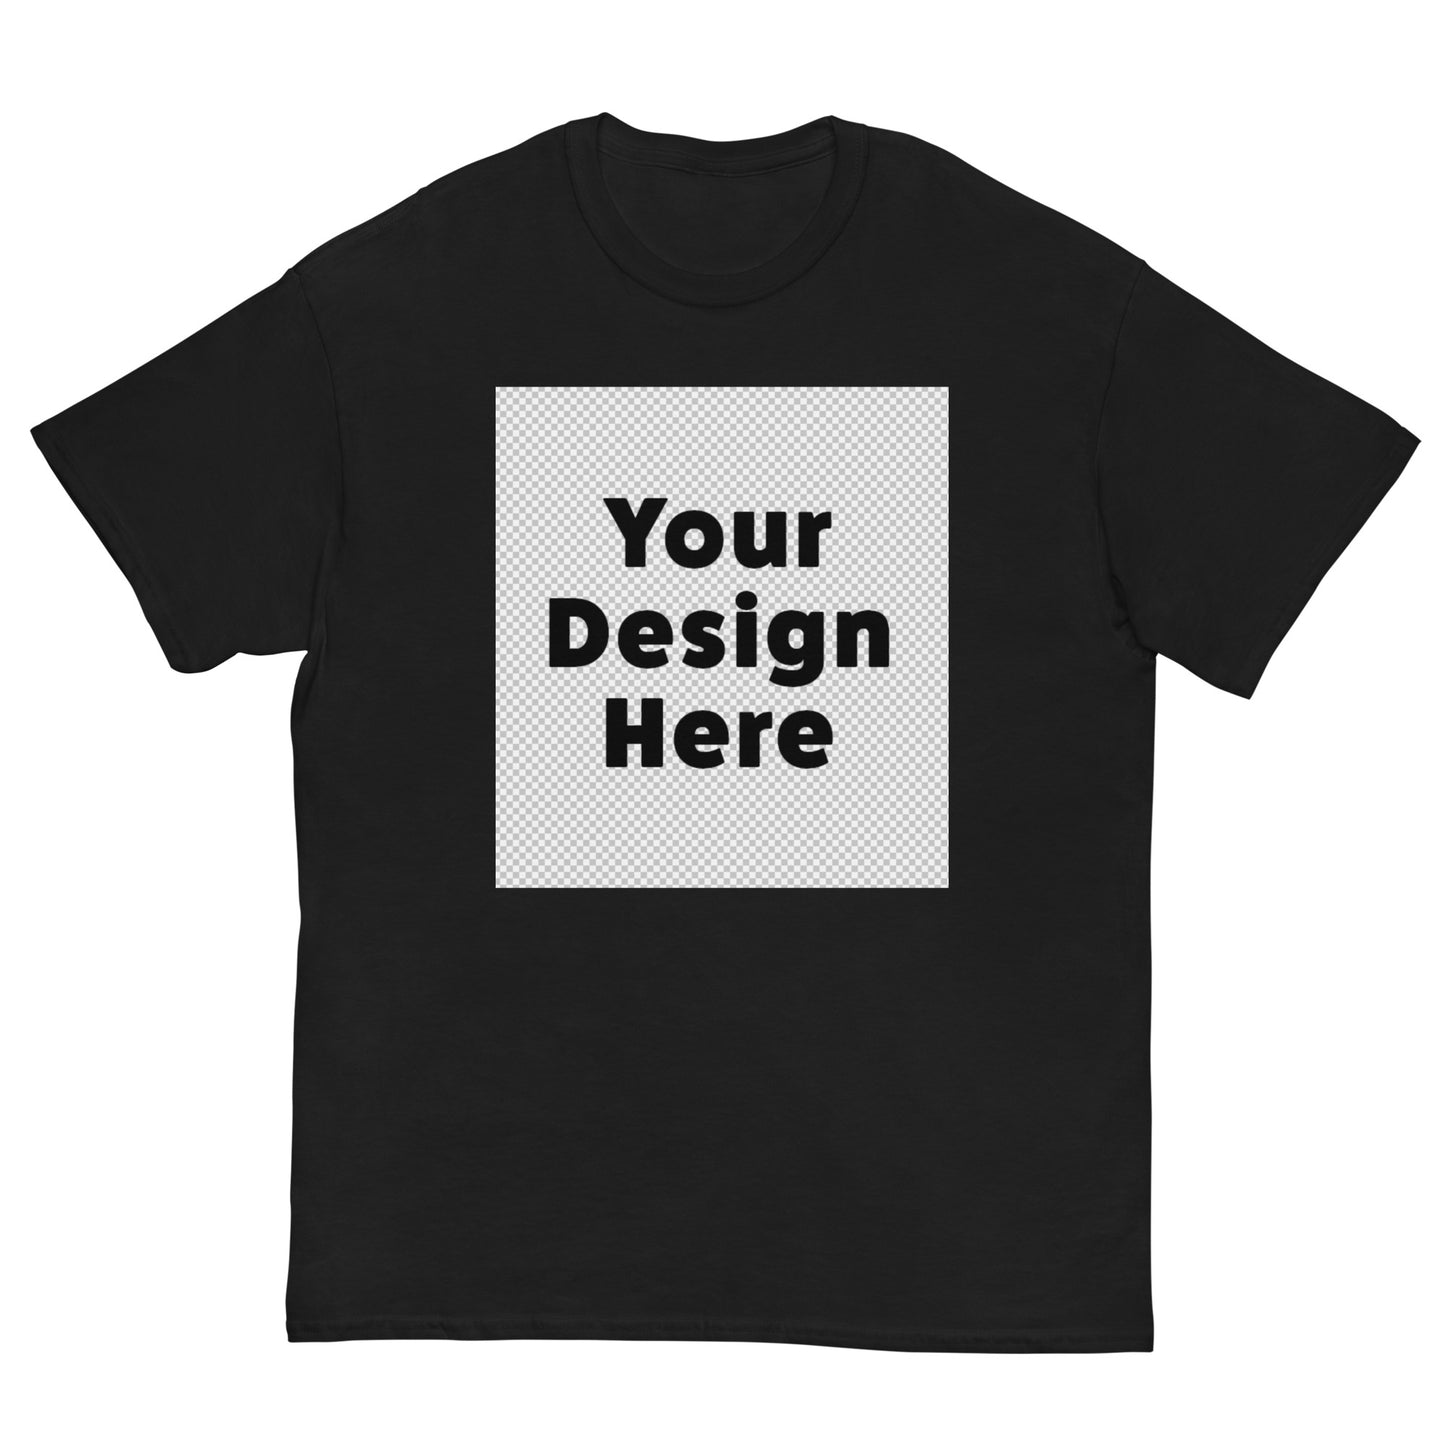 your design here printed on t-shirt